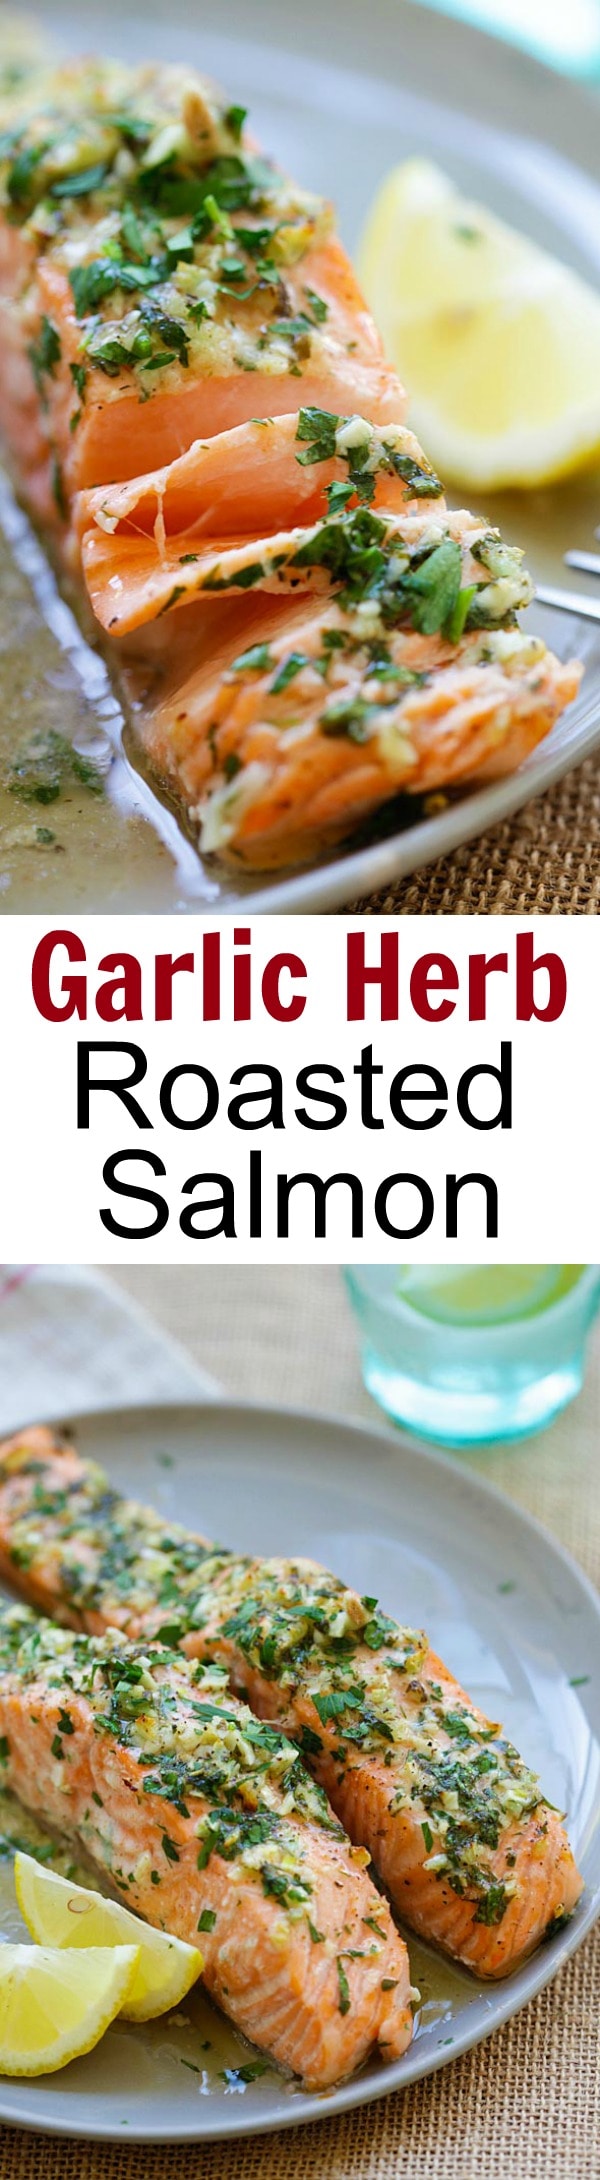 Garlic Herb Roasted Salmon – best roasted salmon recipe ever! Made with butter, garlic, herb, lemon and dinner is ready in 20 mins | rasamalaysia.com